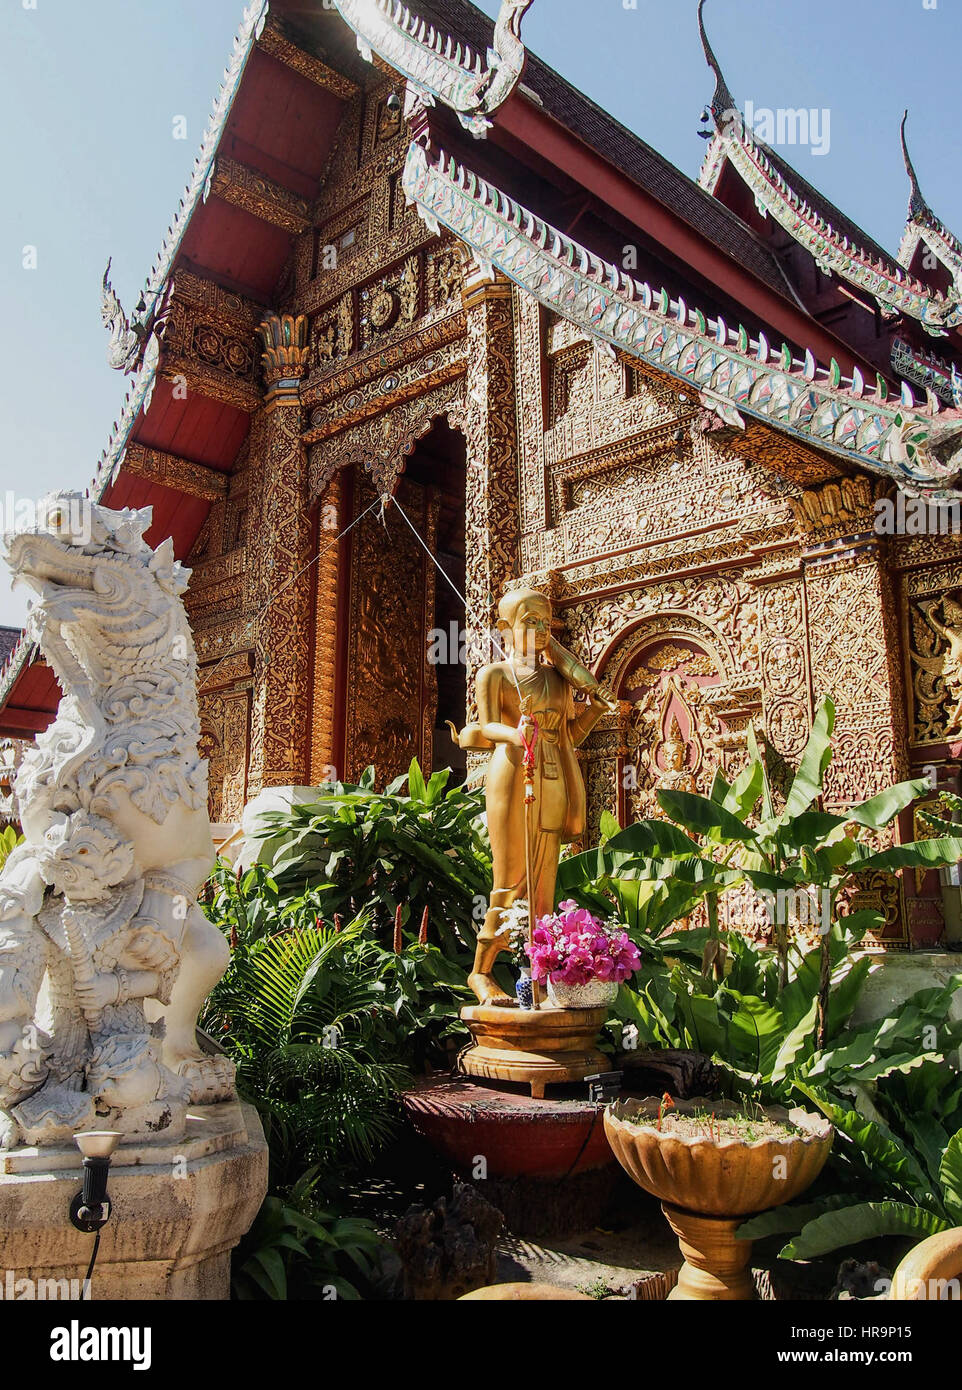 A highly decorated temple in Chiang Mai Thailand Stock Photo